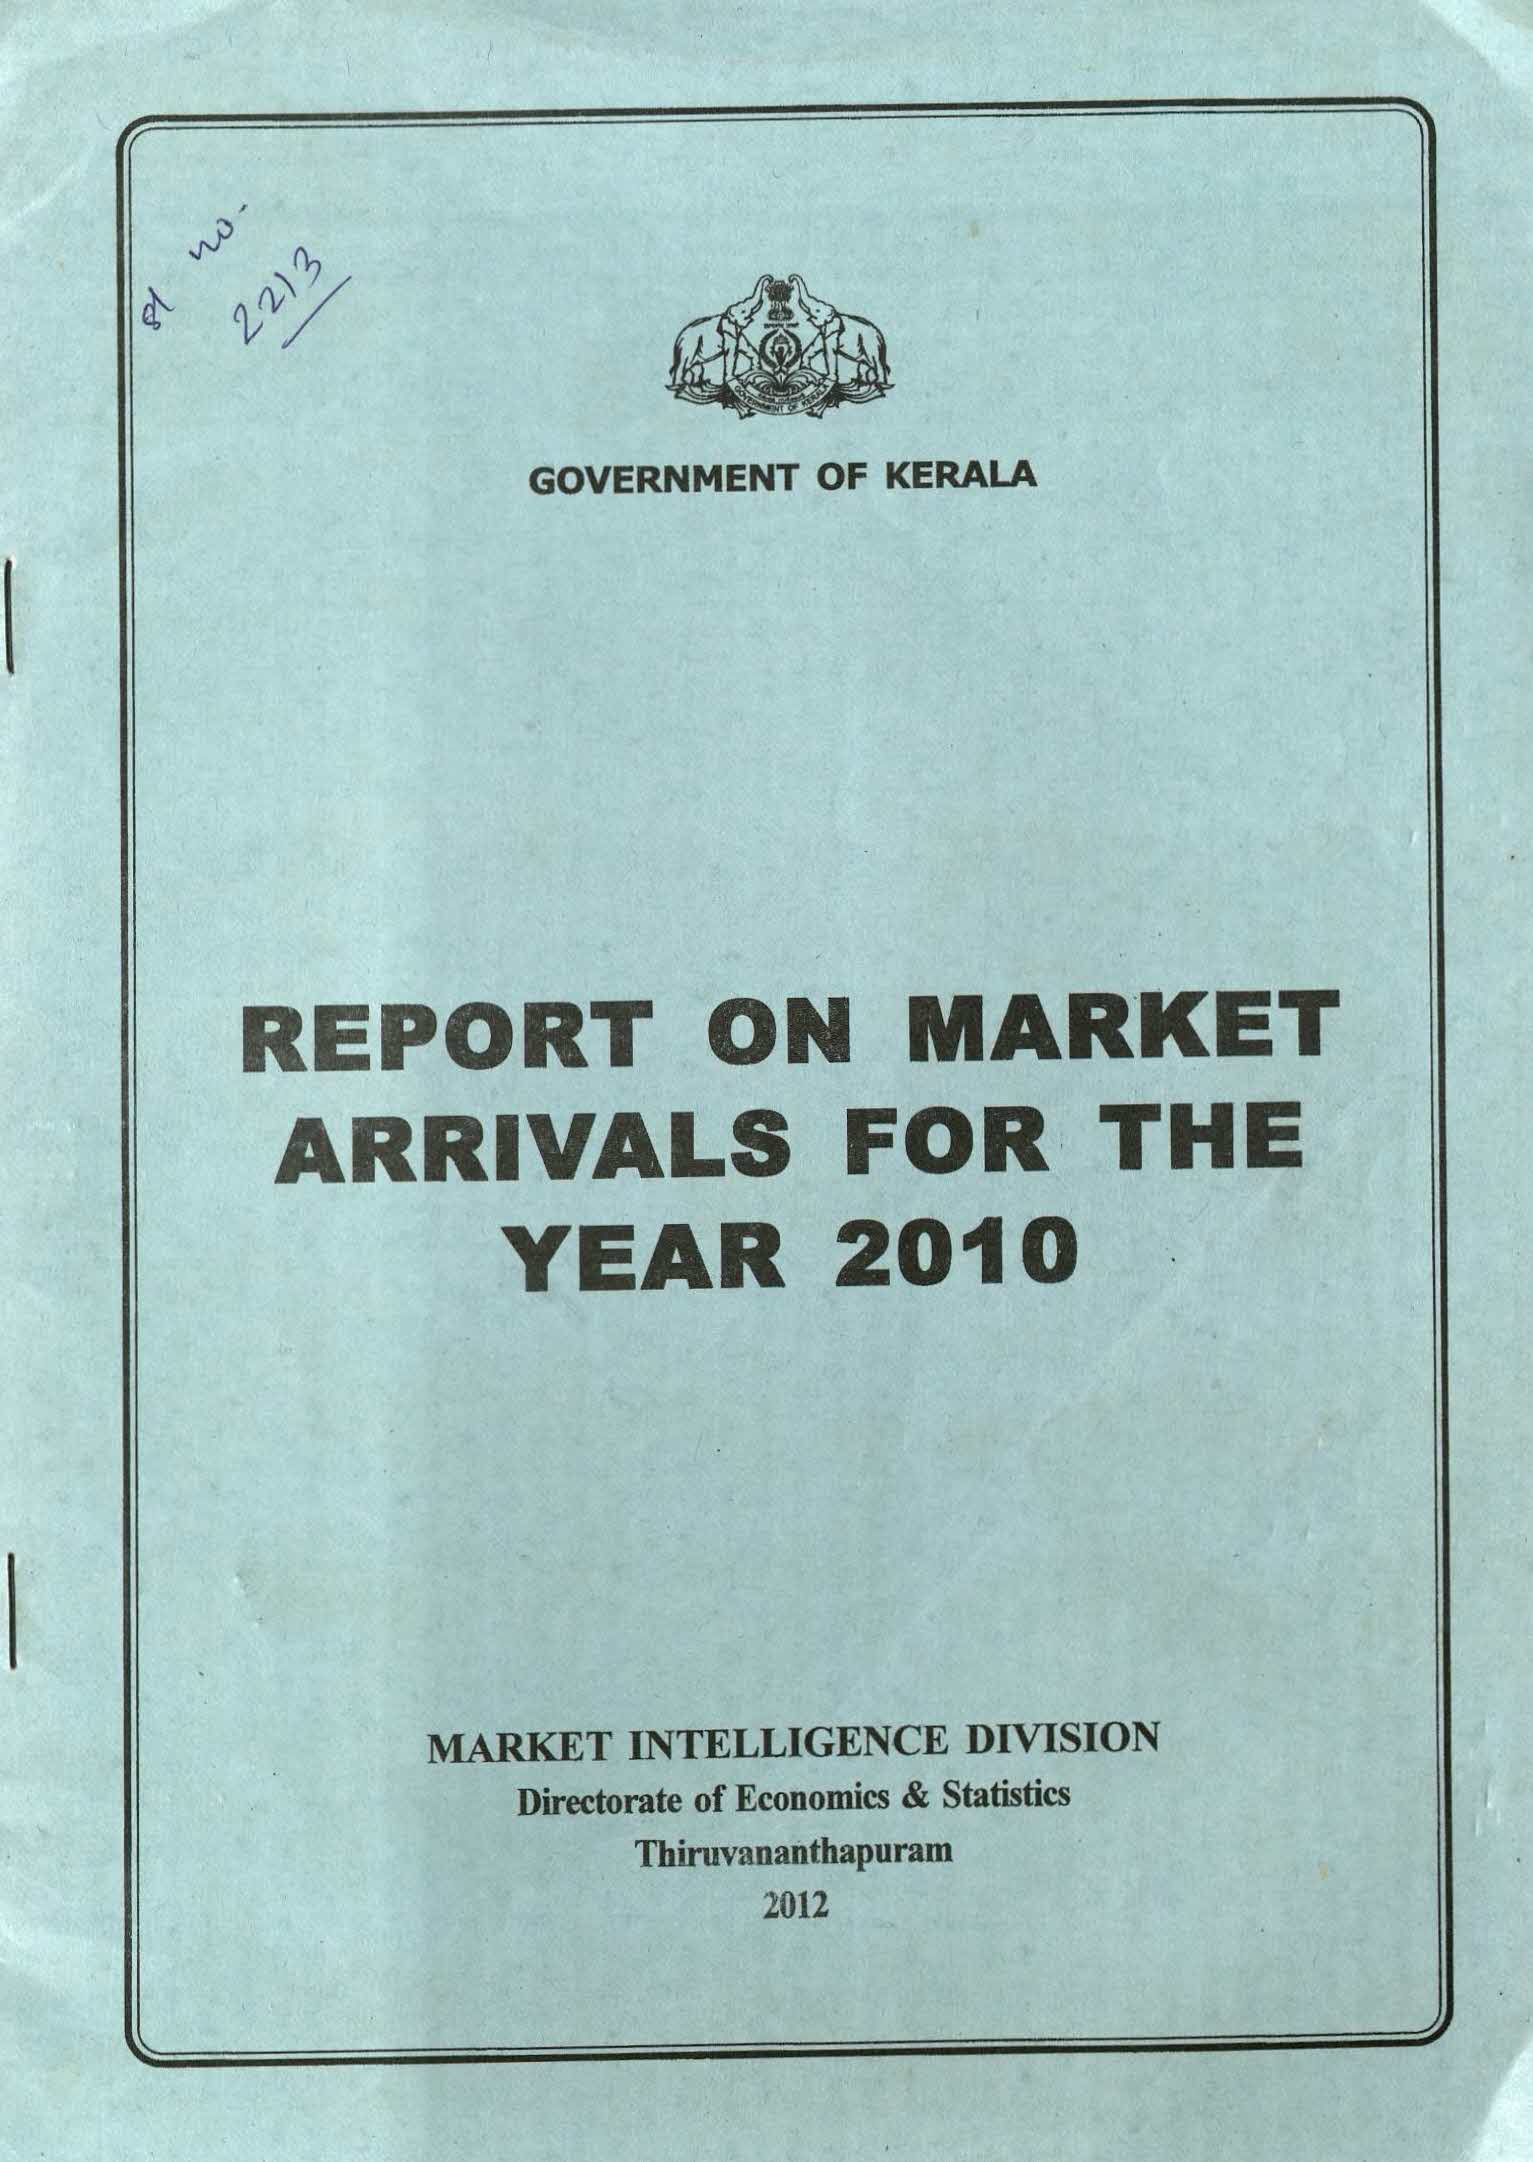 REPORT ON MARKET ARRIVALS FOR THE YEAR 2010